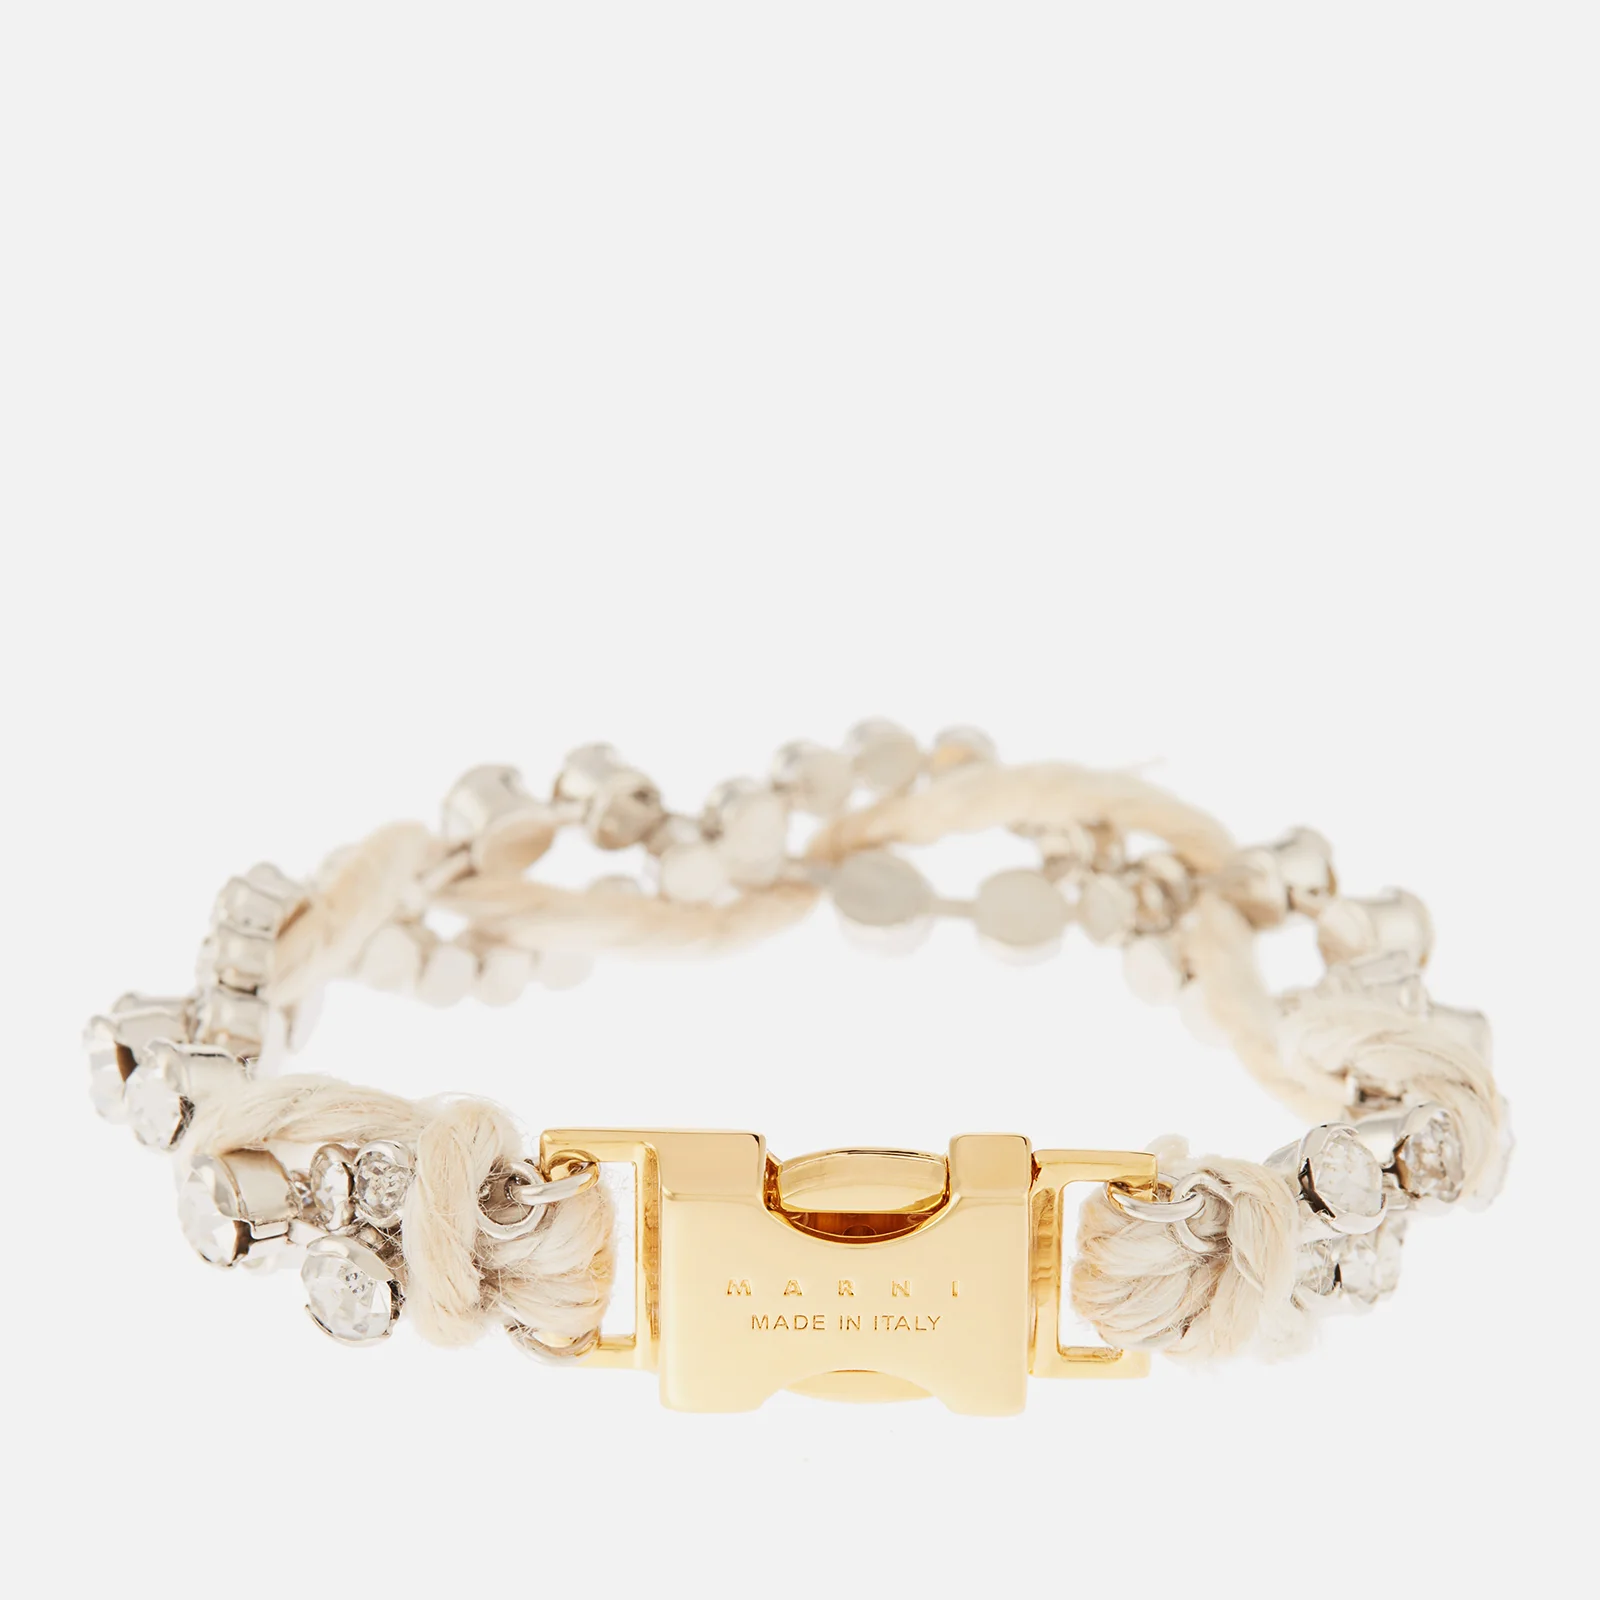 Marni Women's Crystal And Rope Bracelet - Crystal+Rope Image 1